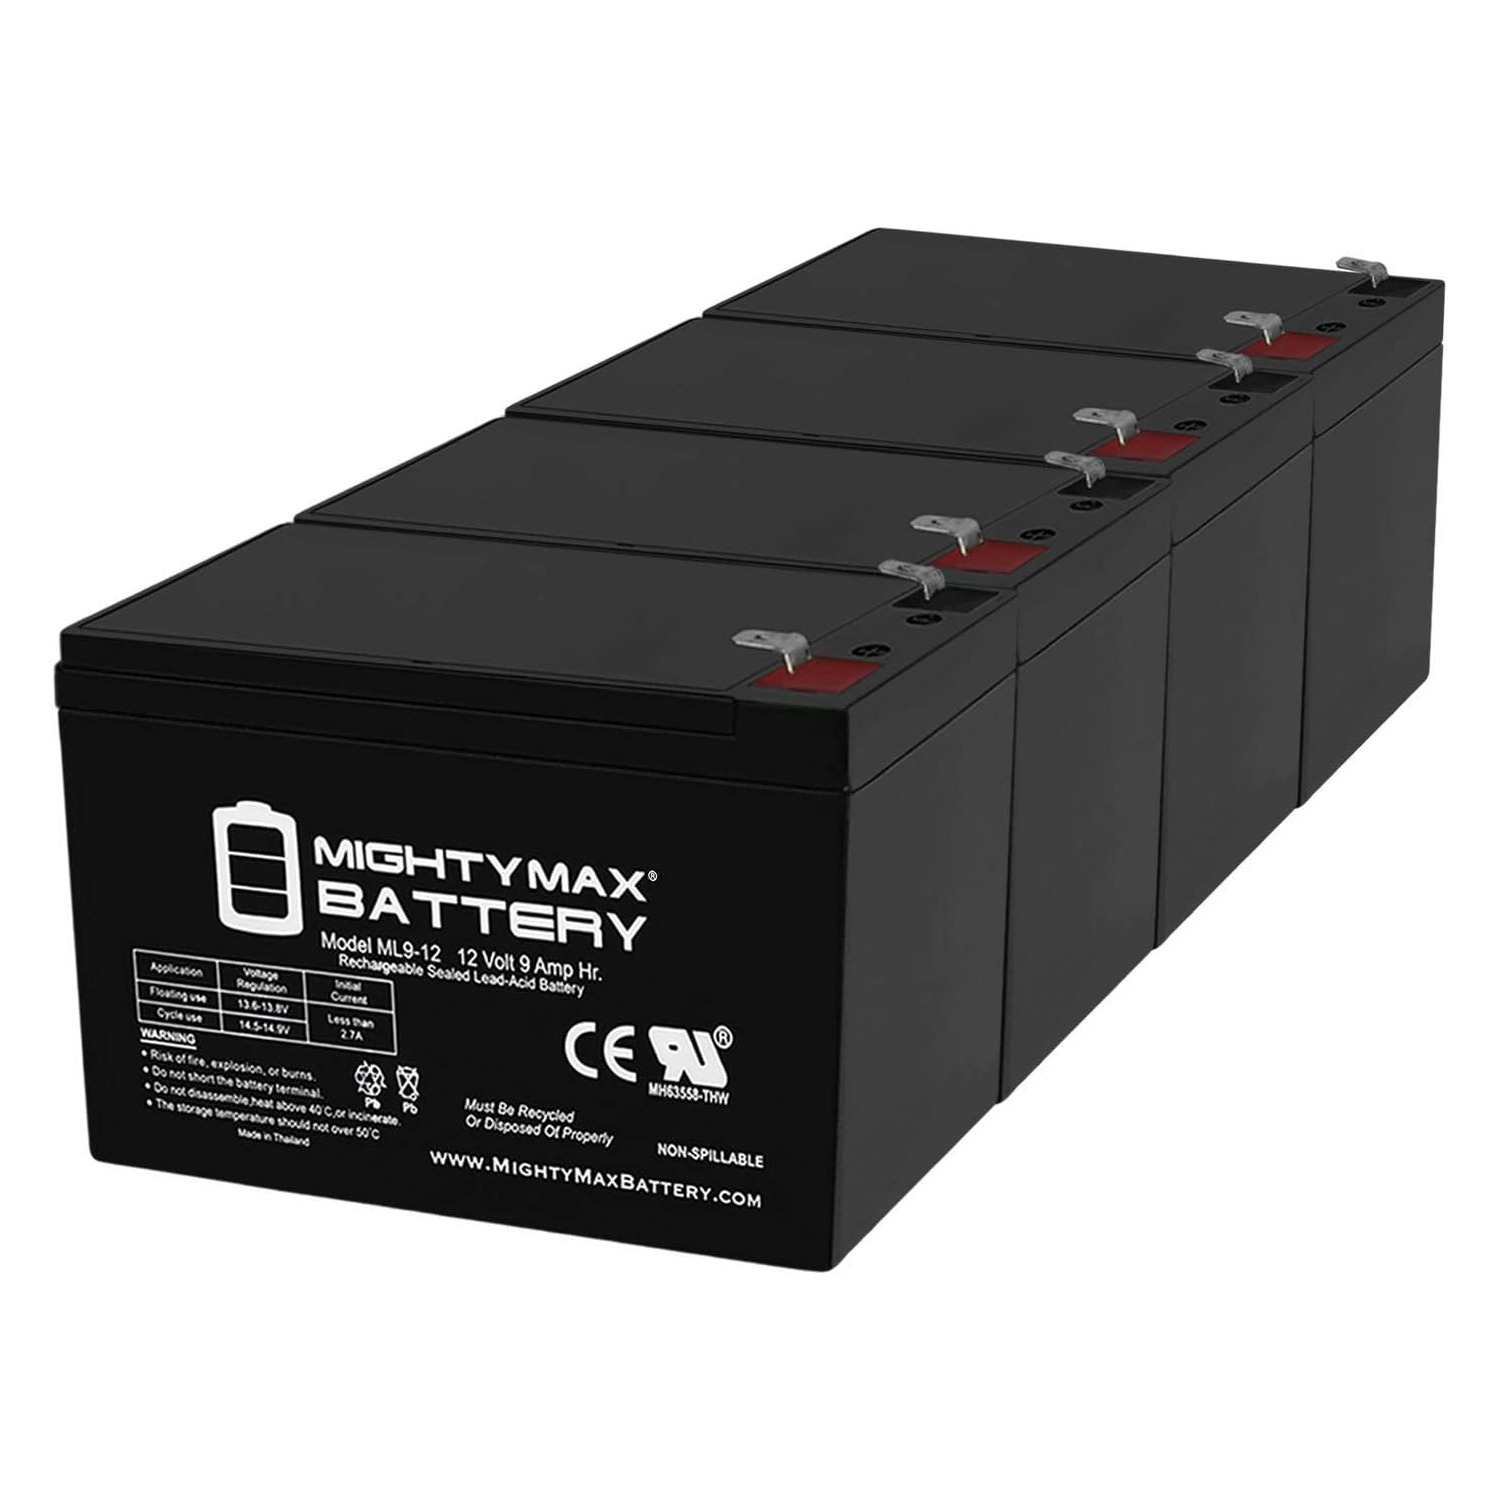 Altronix SMP5PMCTXPD8 12V, 9Ah Lead Acid Battery - 4 Pack